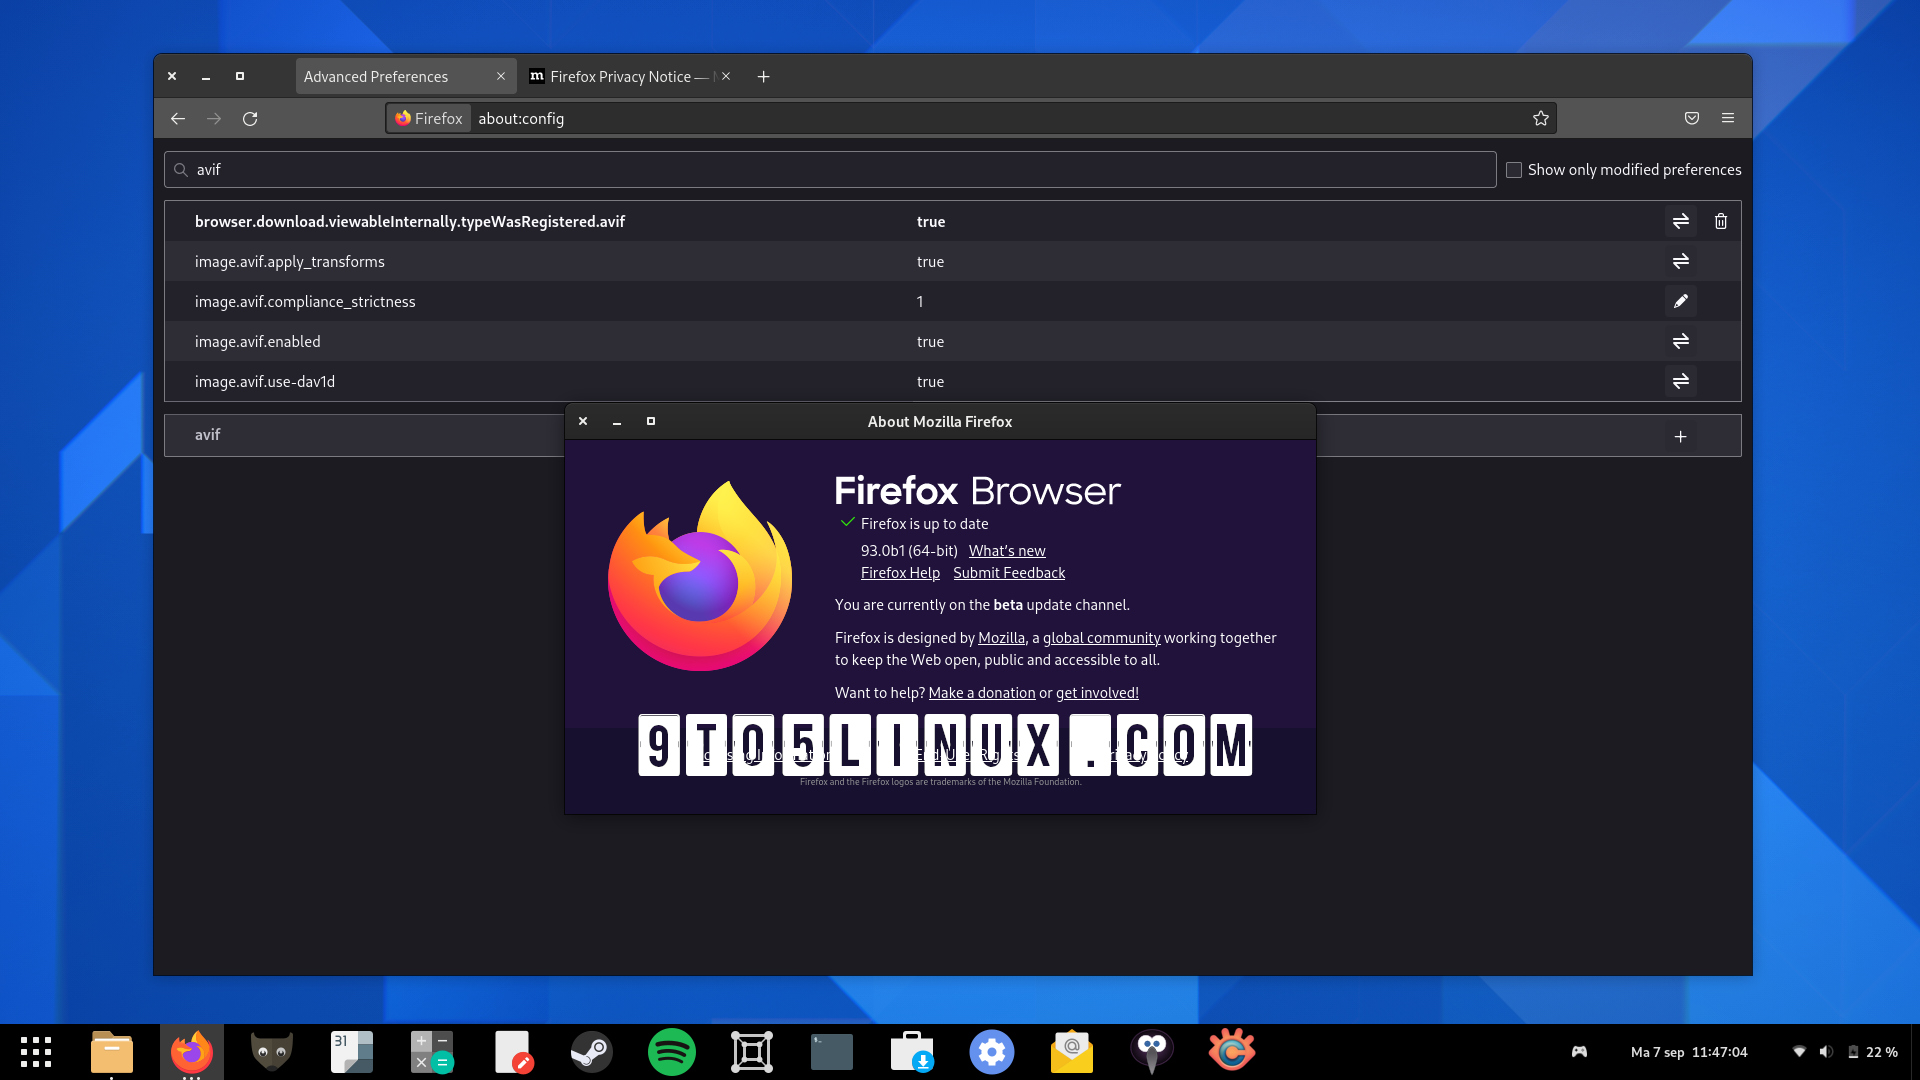 Firefox 93 Enters Public Beta Testing with AVIF Support Enabled by Default